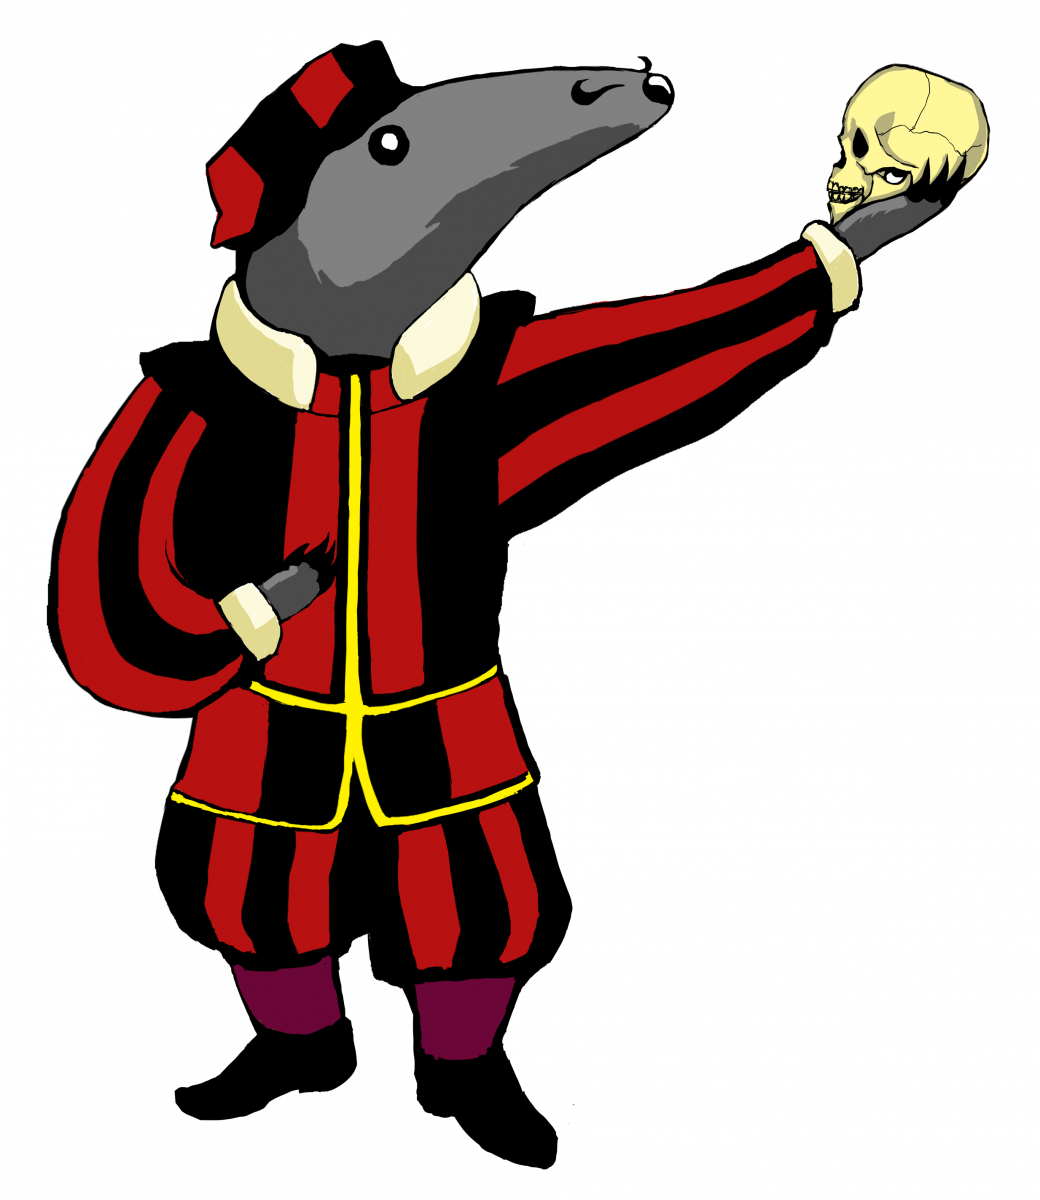 Peter the Anteater in Shakespearean garb, holding a skull it his outstretched hand